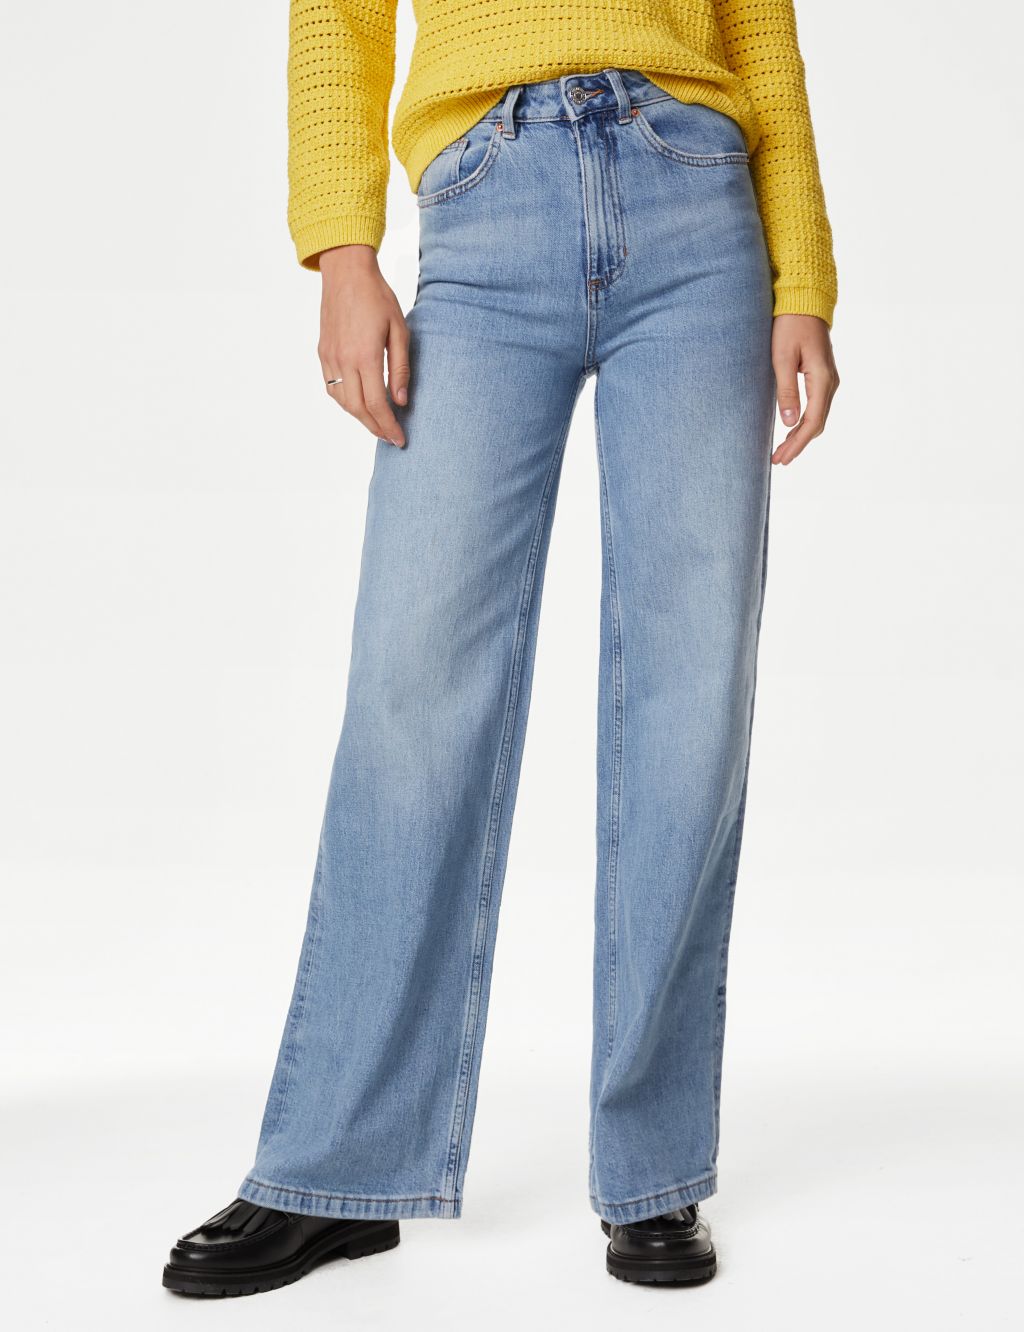 The Wide-Leg Jeans image 4